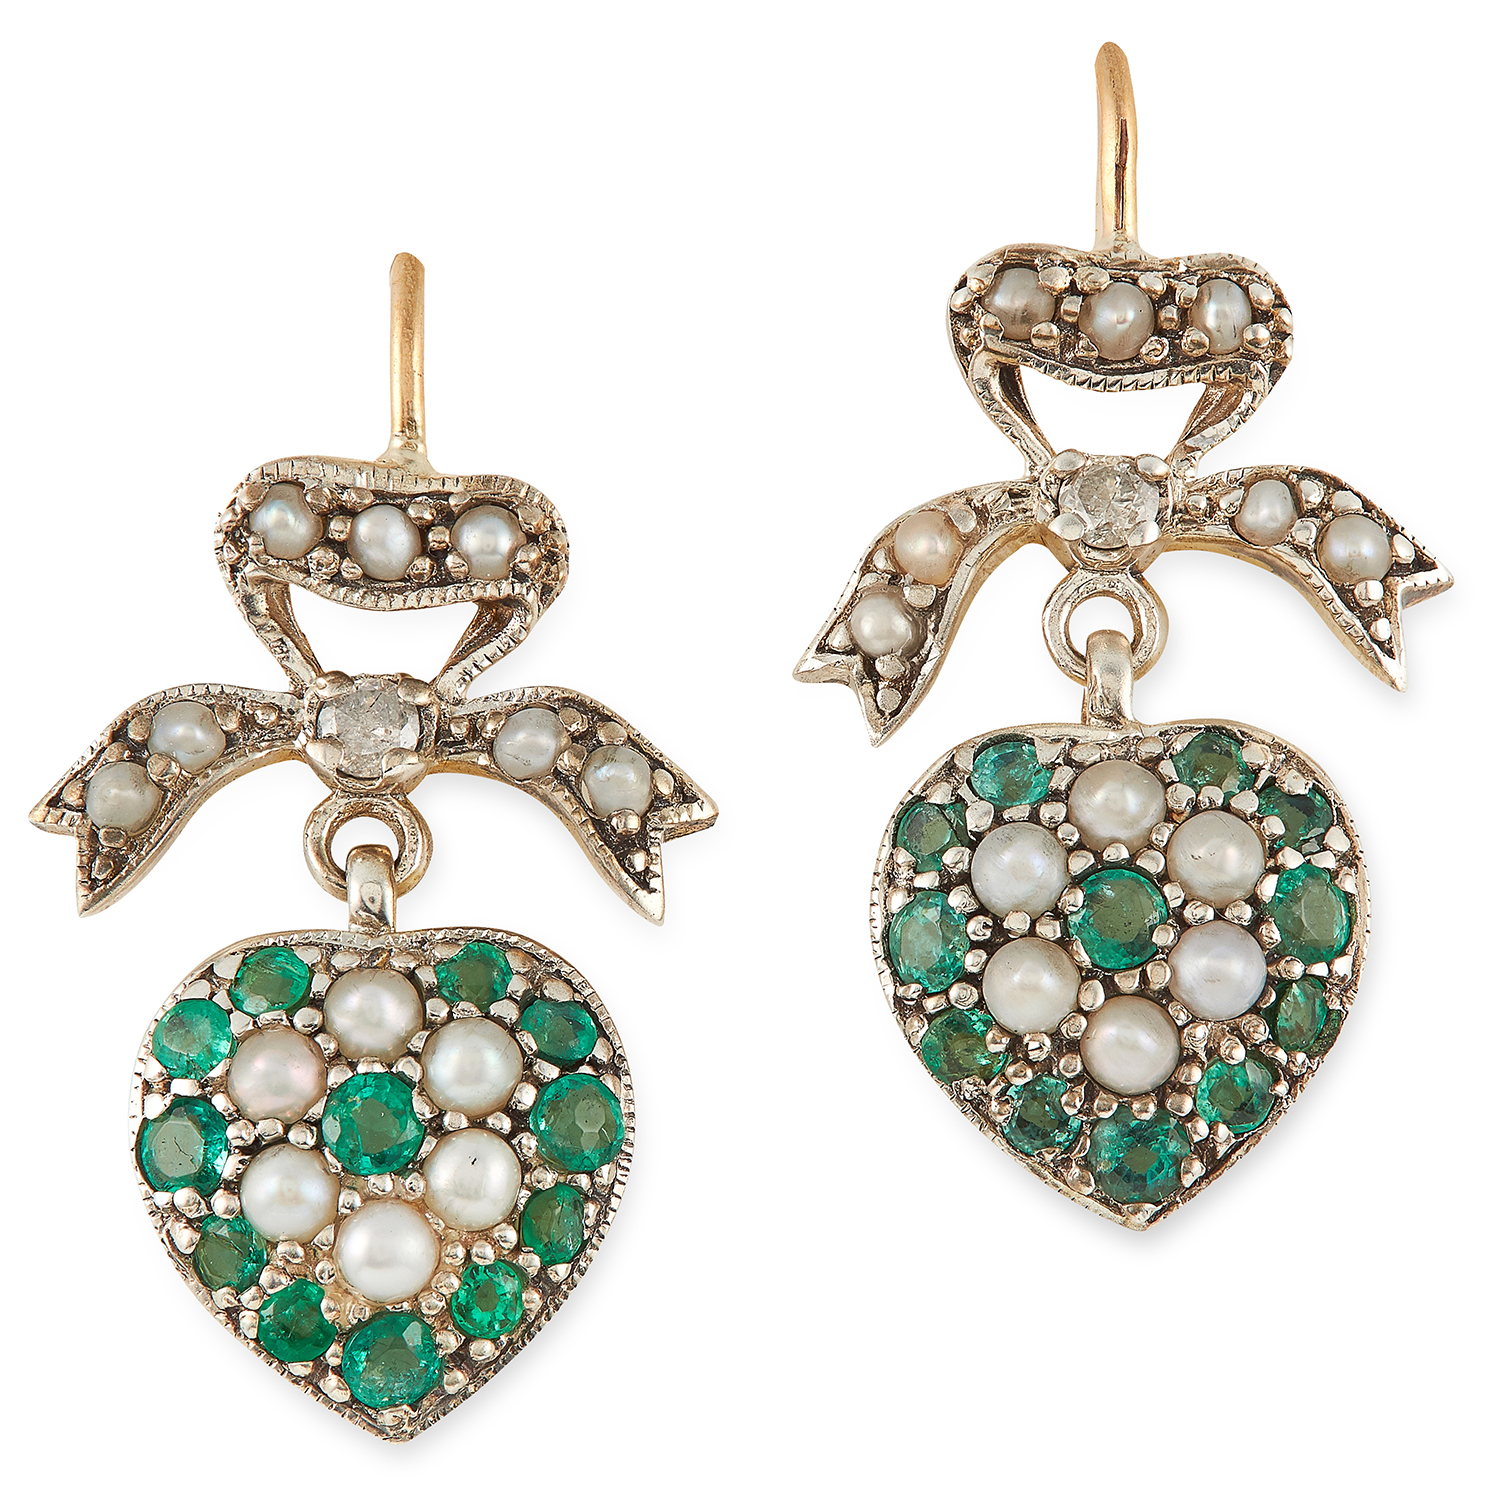 EMERALD AND PEARL SWEETHEART EARRINGS in ribbon and heart motif set with round cut emeralds and